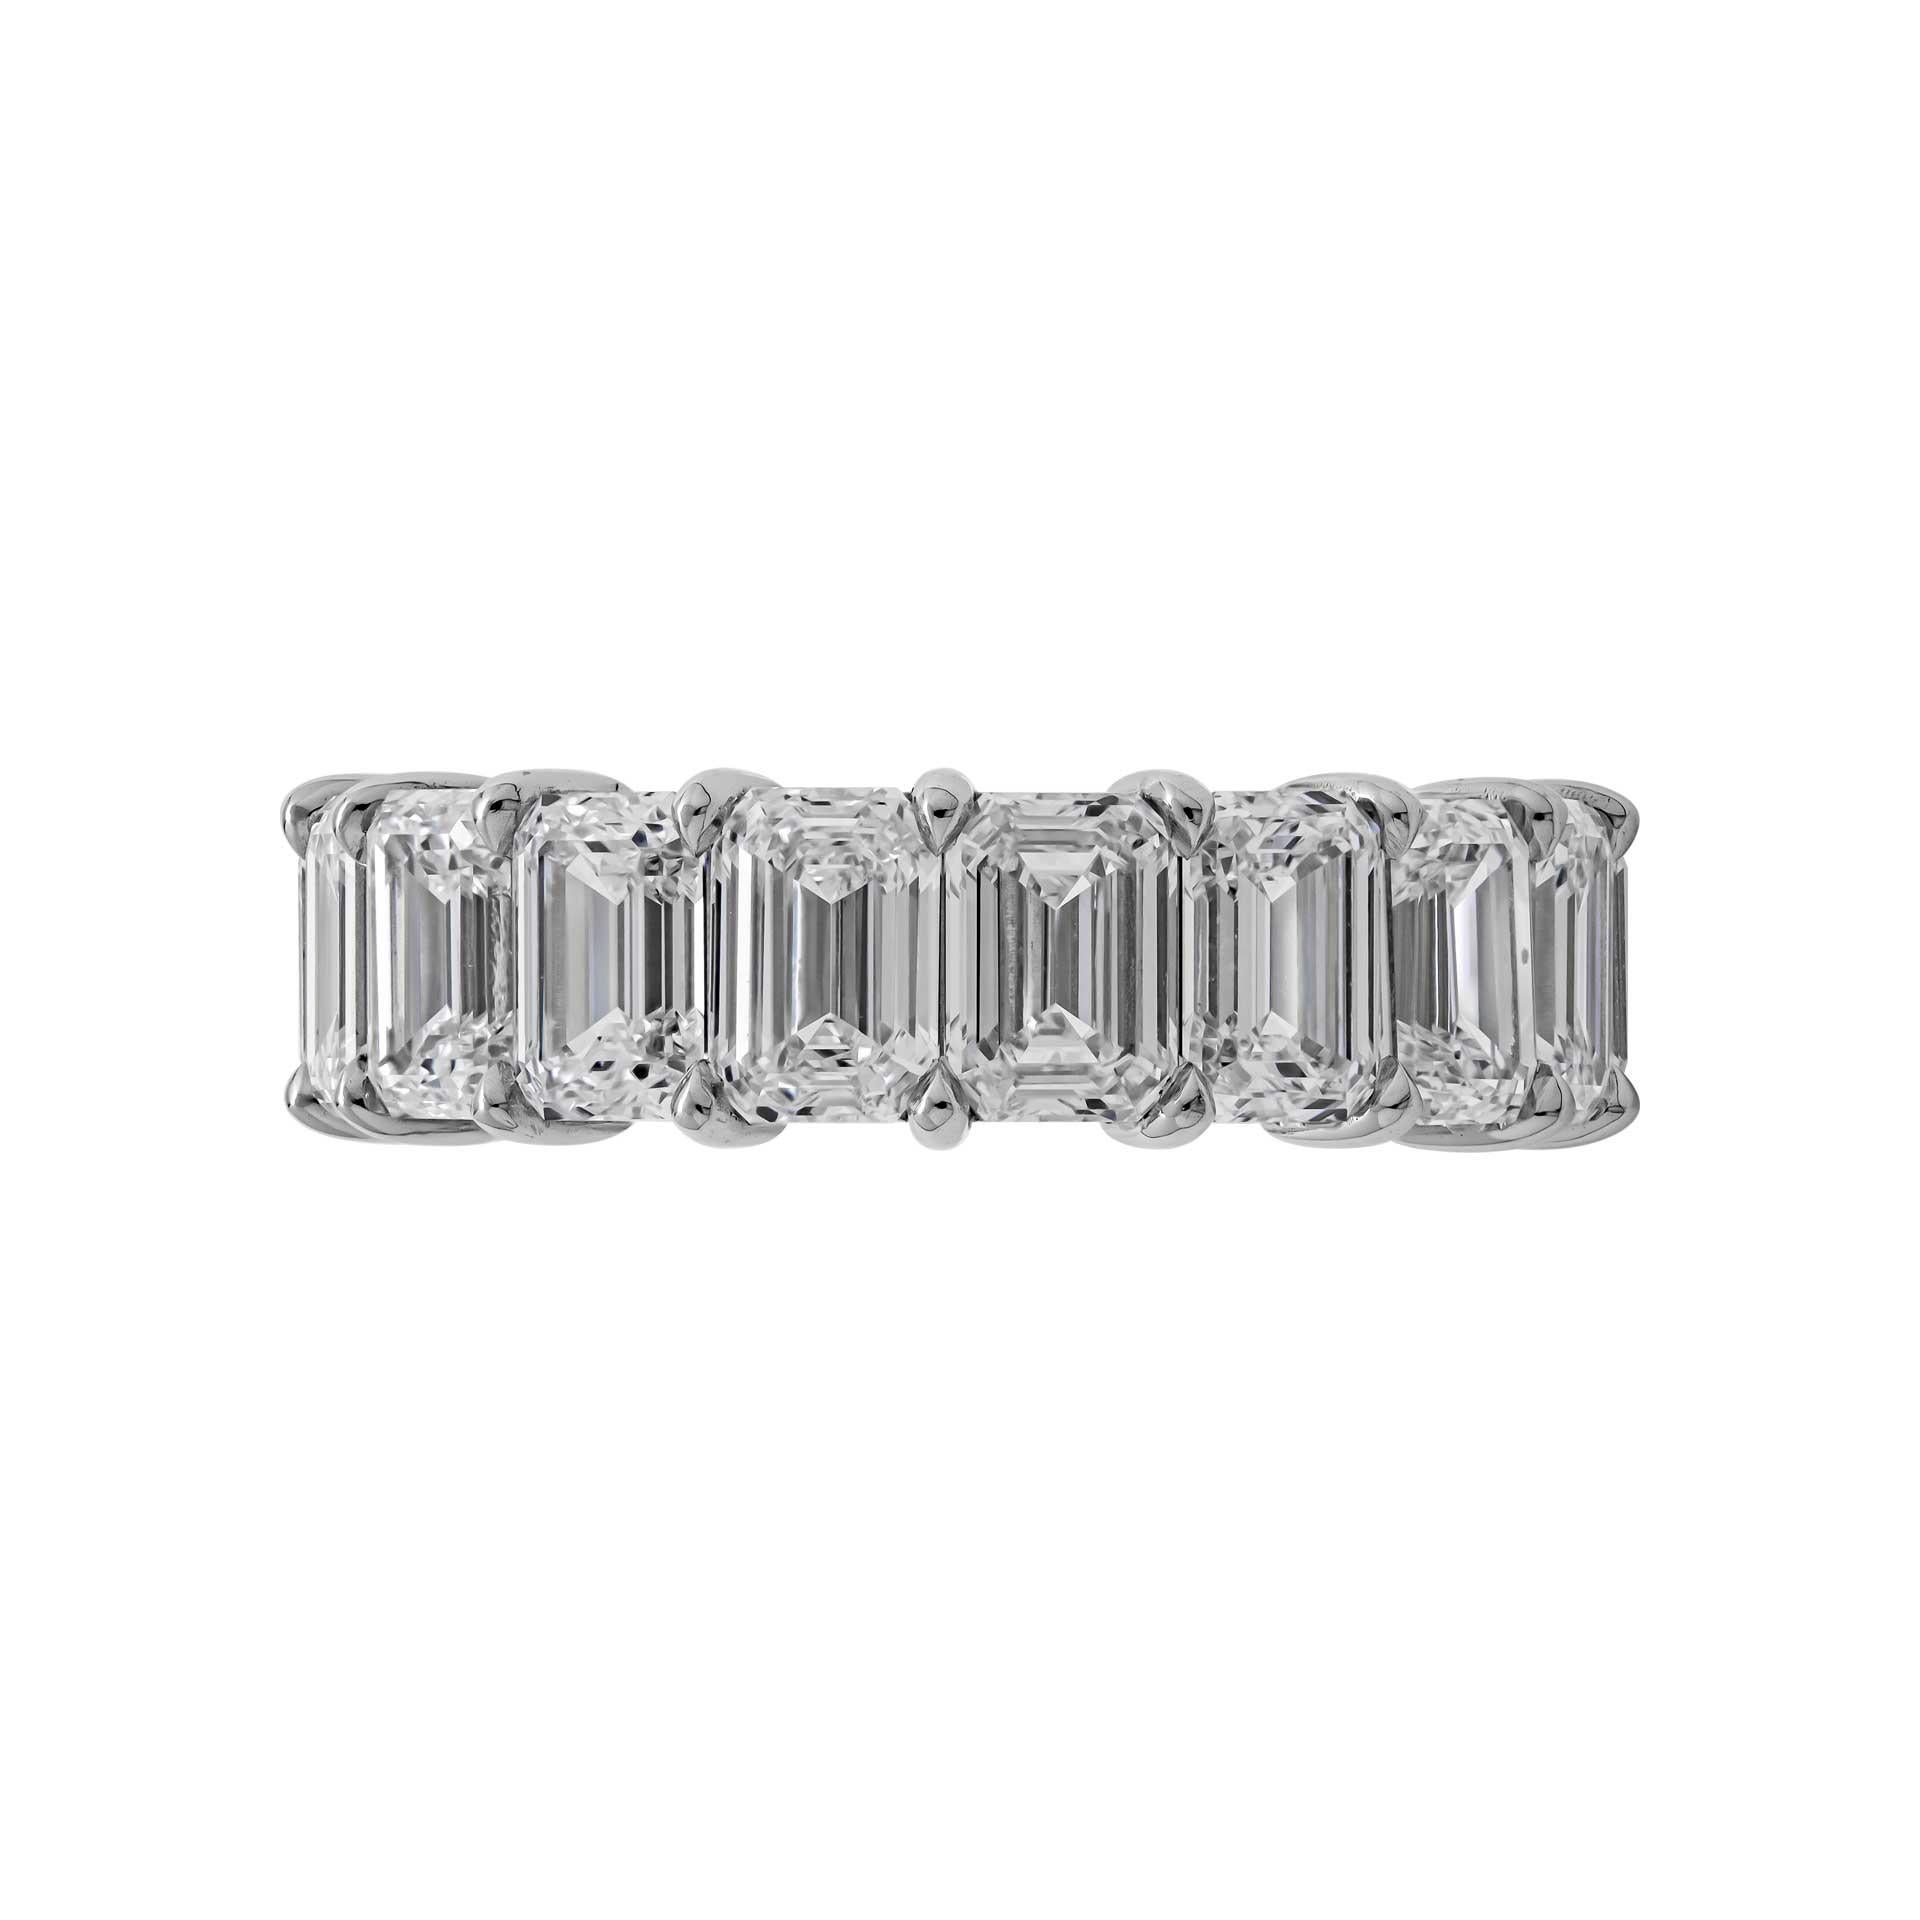 The most wanted piece of jewelry in 2022, timeless, edgy, and stylish! 
Handcrafted Band, the highest quality of mounting you will find!
 Delicate yet sturdy Mounted in Platinum 950, 17 GIA Certified emeralds cut diamonds totaling 10.23ct total,
